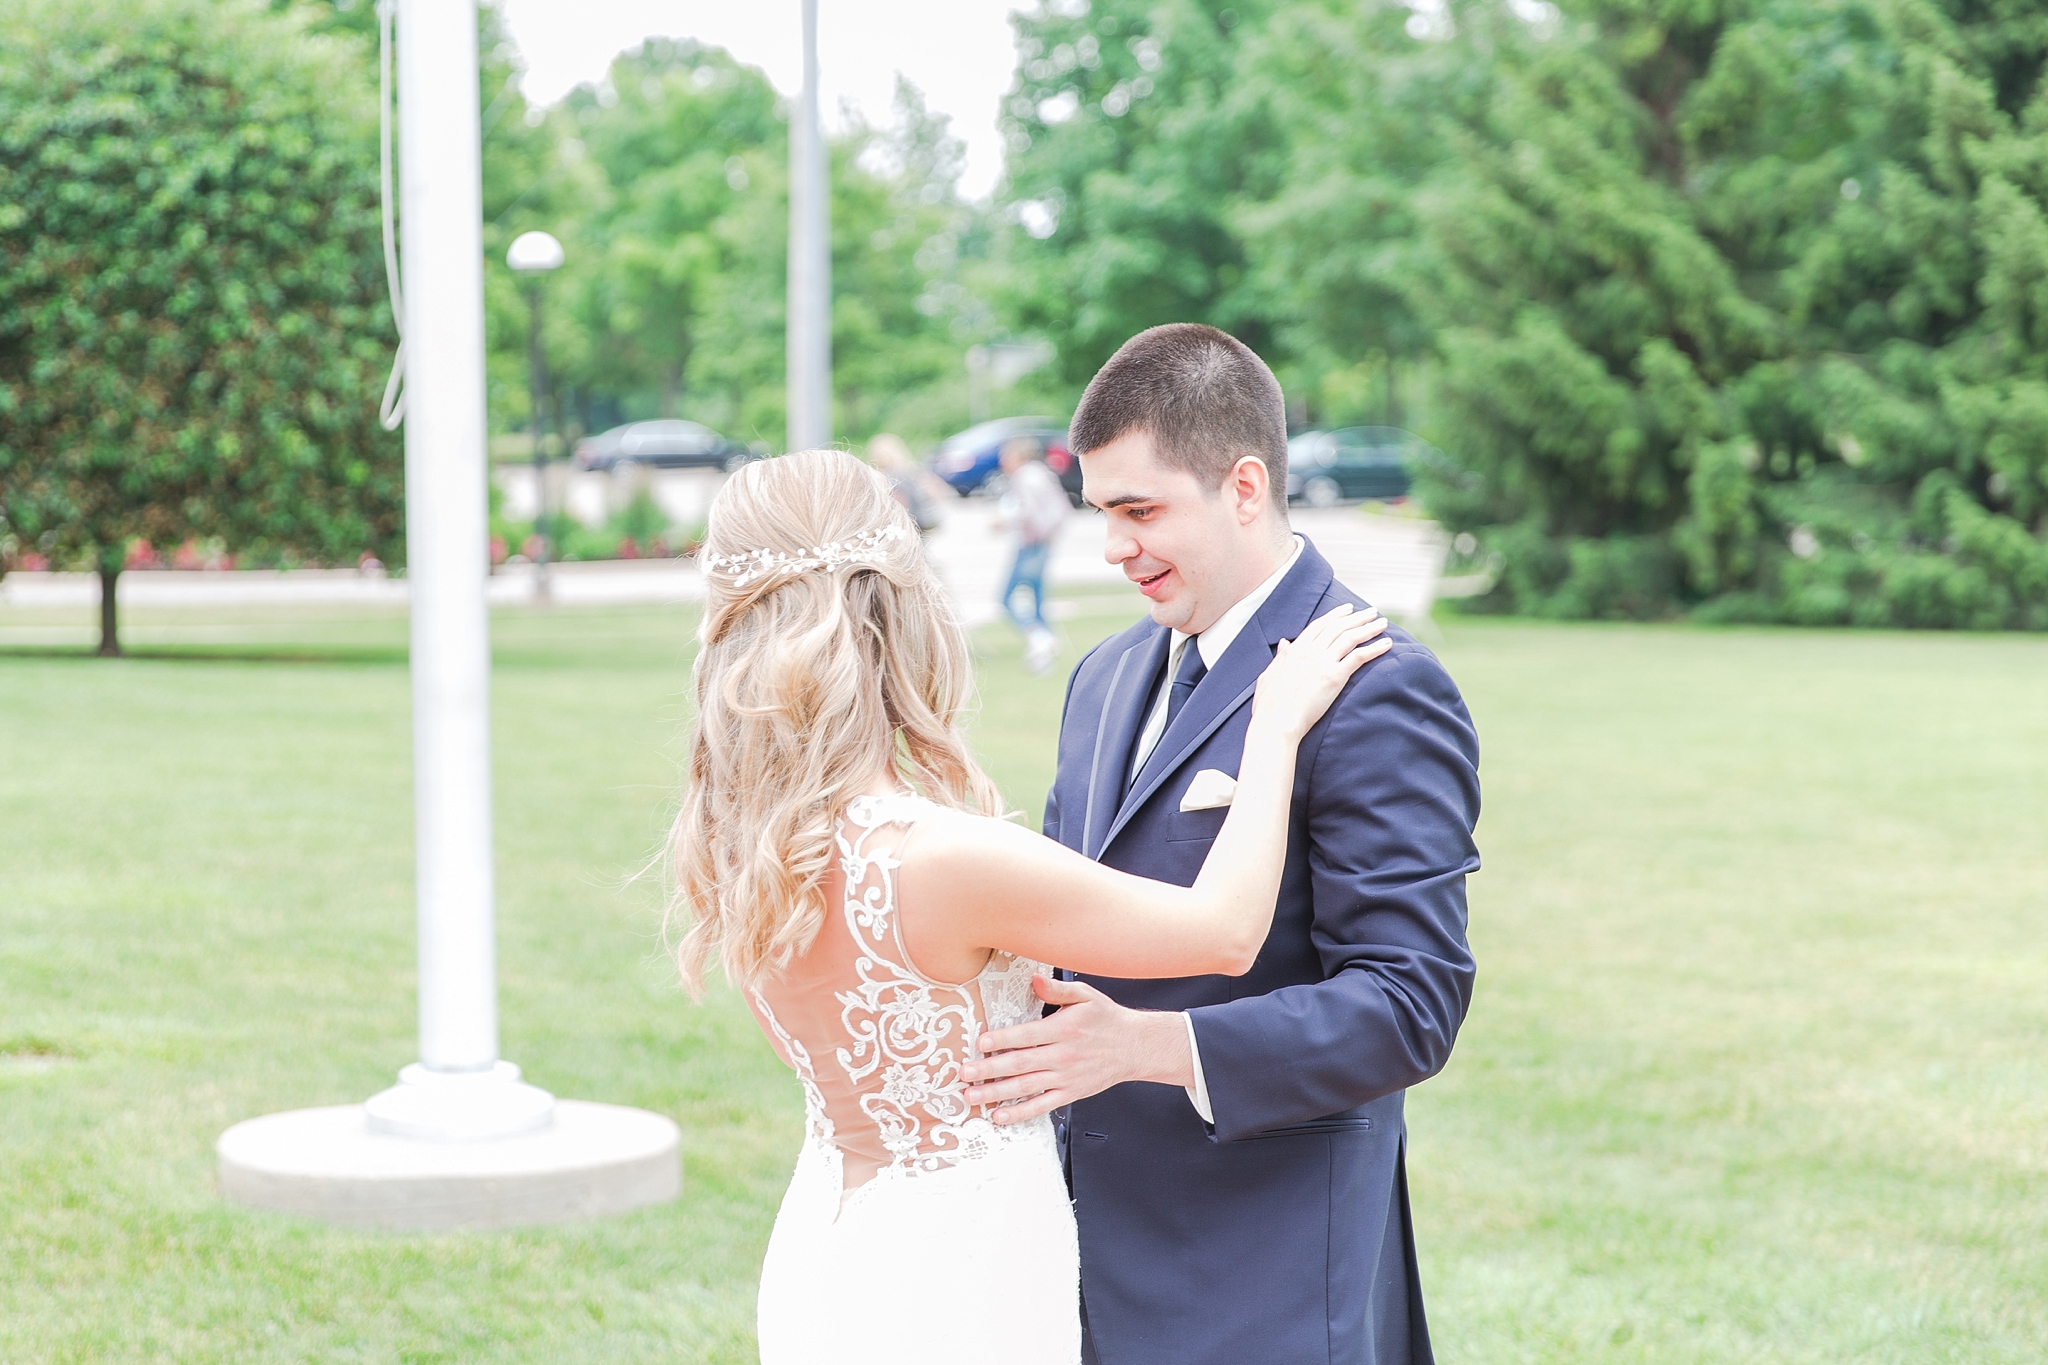 candid-romantic-wedding-photos-at-the-h-hotel-in-midland-michigan-by-courtney-carolyn-photography_0026.jpg